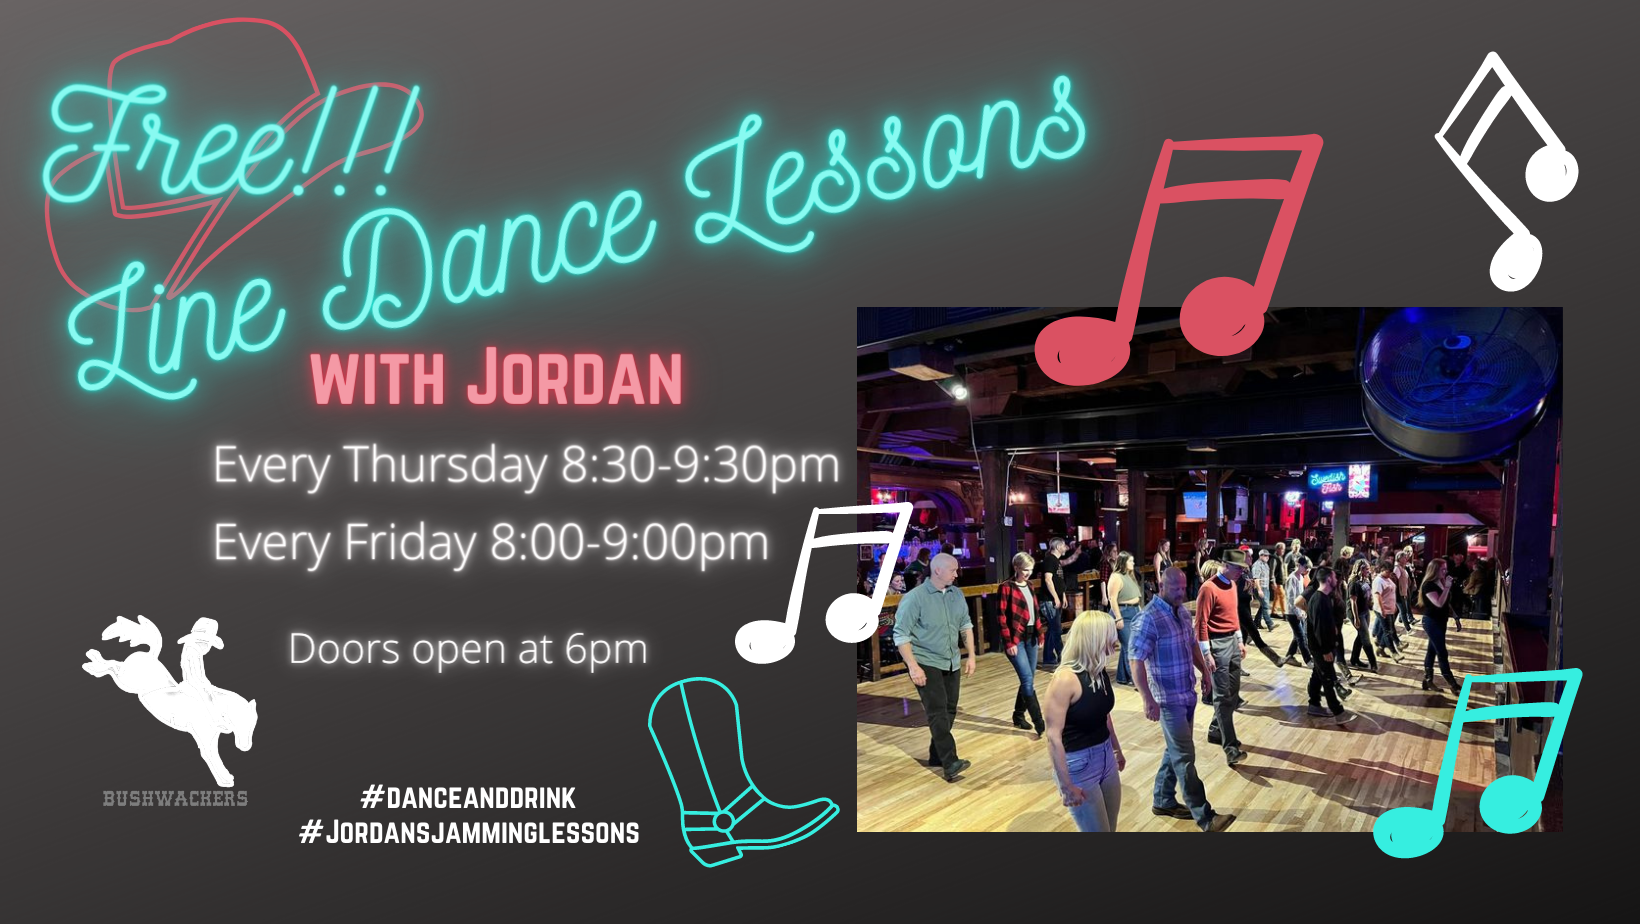 Line Dance Lessons event